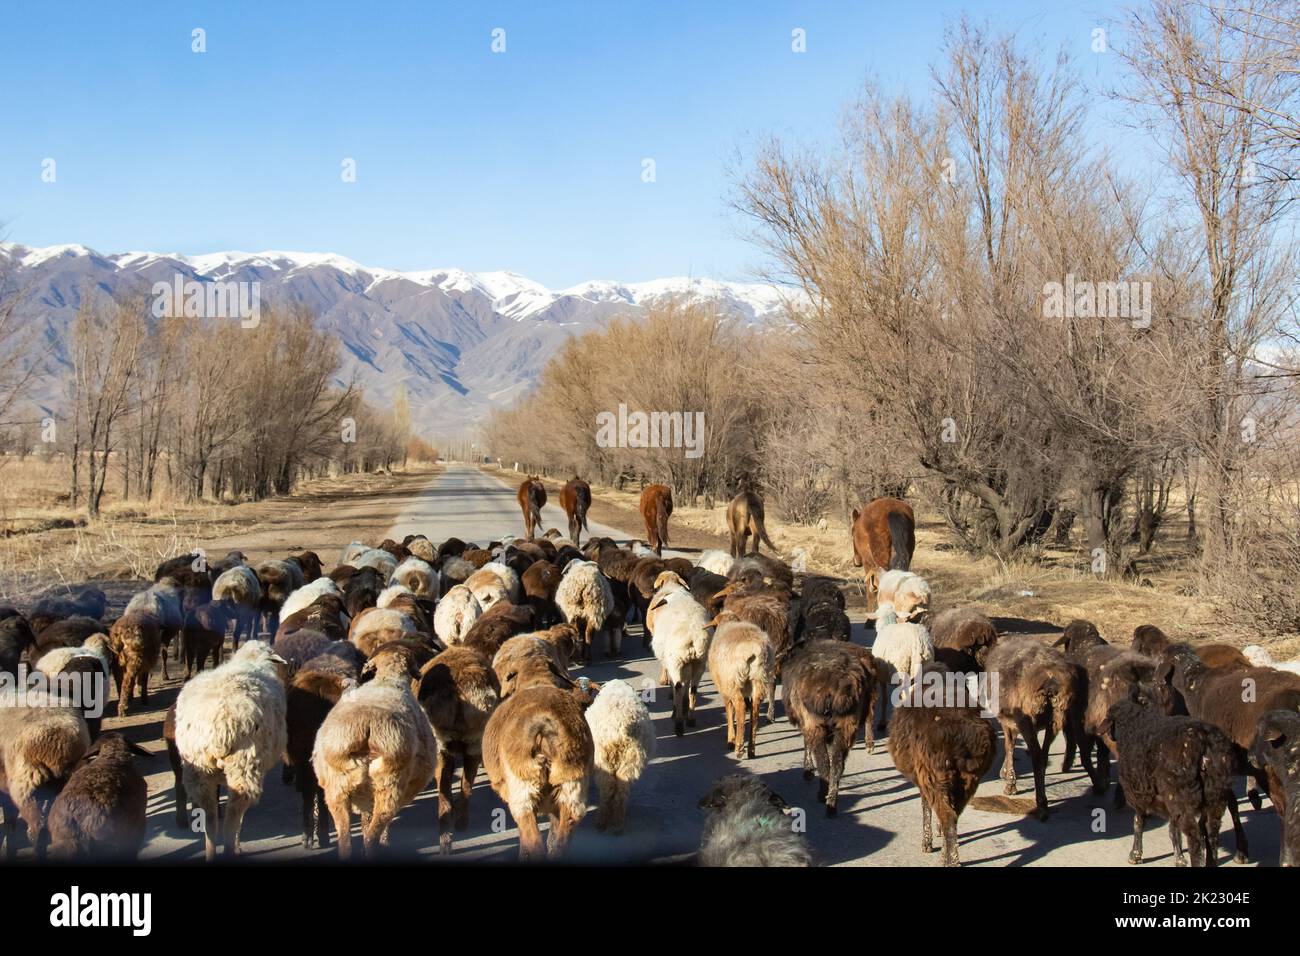 Rural view of a flock of sheeps and some horses in a road in the kyrgyz countryside, with mountains on the background covered with snow Stock Photo